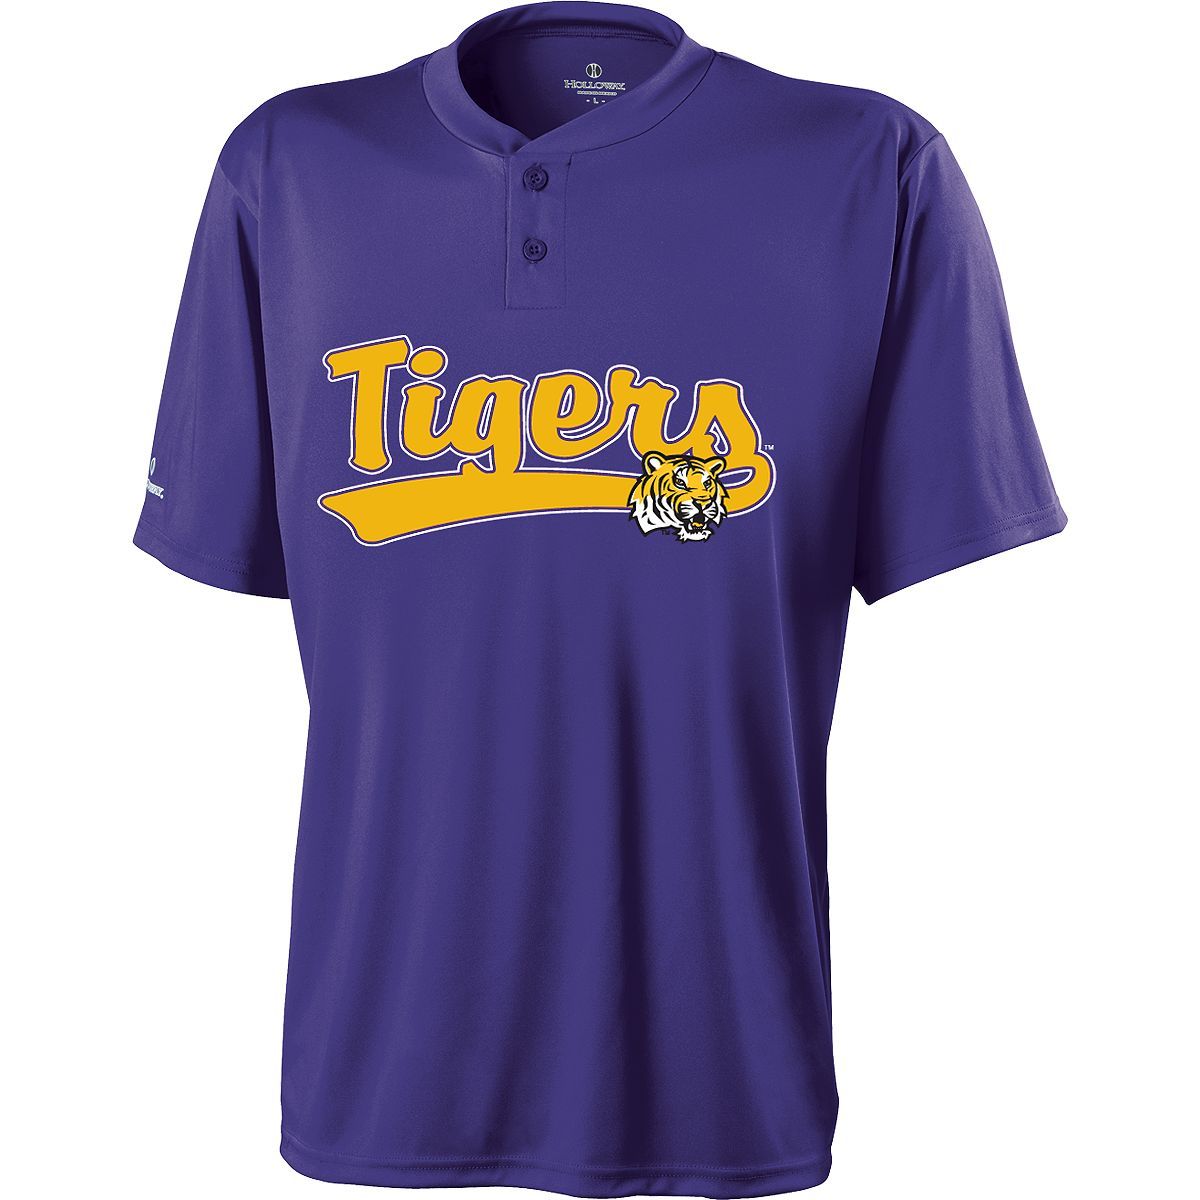 Holloway Cyr Adult Ball Park Jersey in Lsu  -Part of the Adult, Adult-Jersey, Holloway, Shirts product lines at KanaleyCreations.com